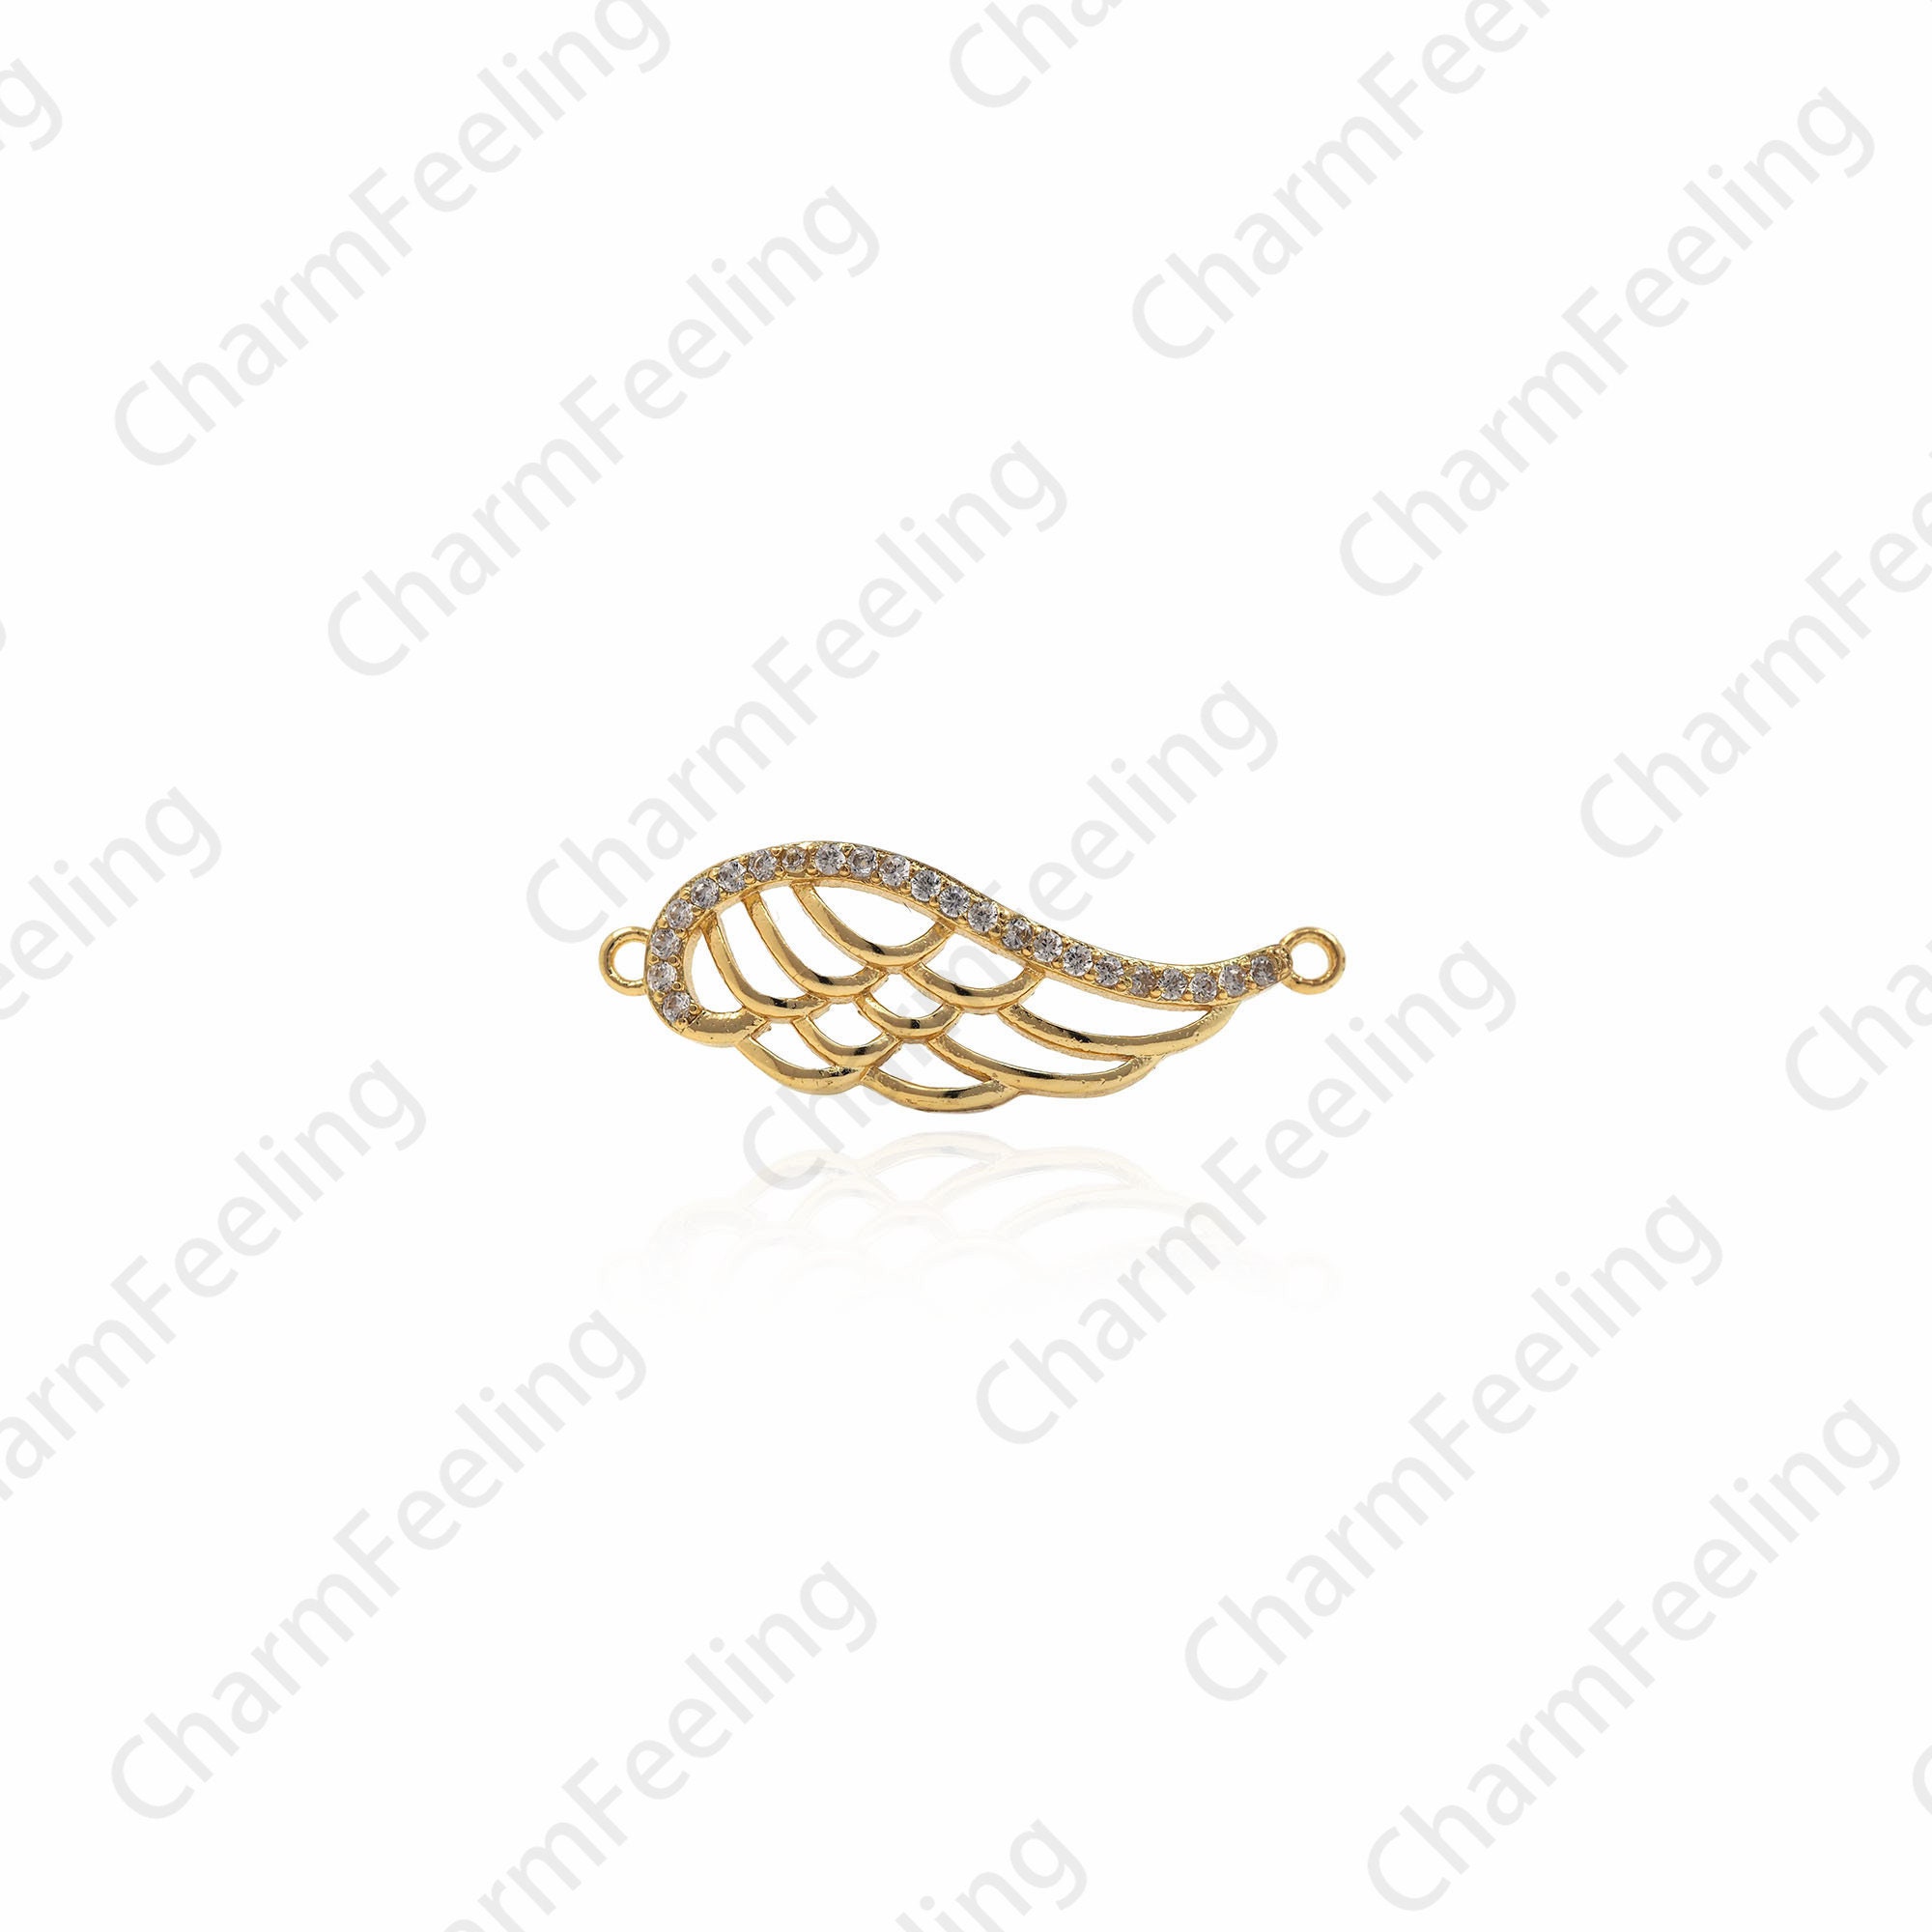 Cubic Zirconia Angel Wing Connector, Charm, Gold Pendant, Diy Jewelry Making Accessories 9.3x27.8x2.5mm 1Pcs